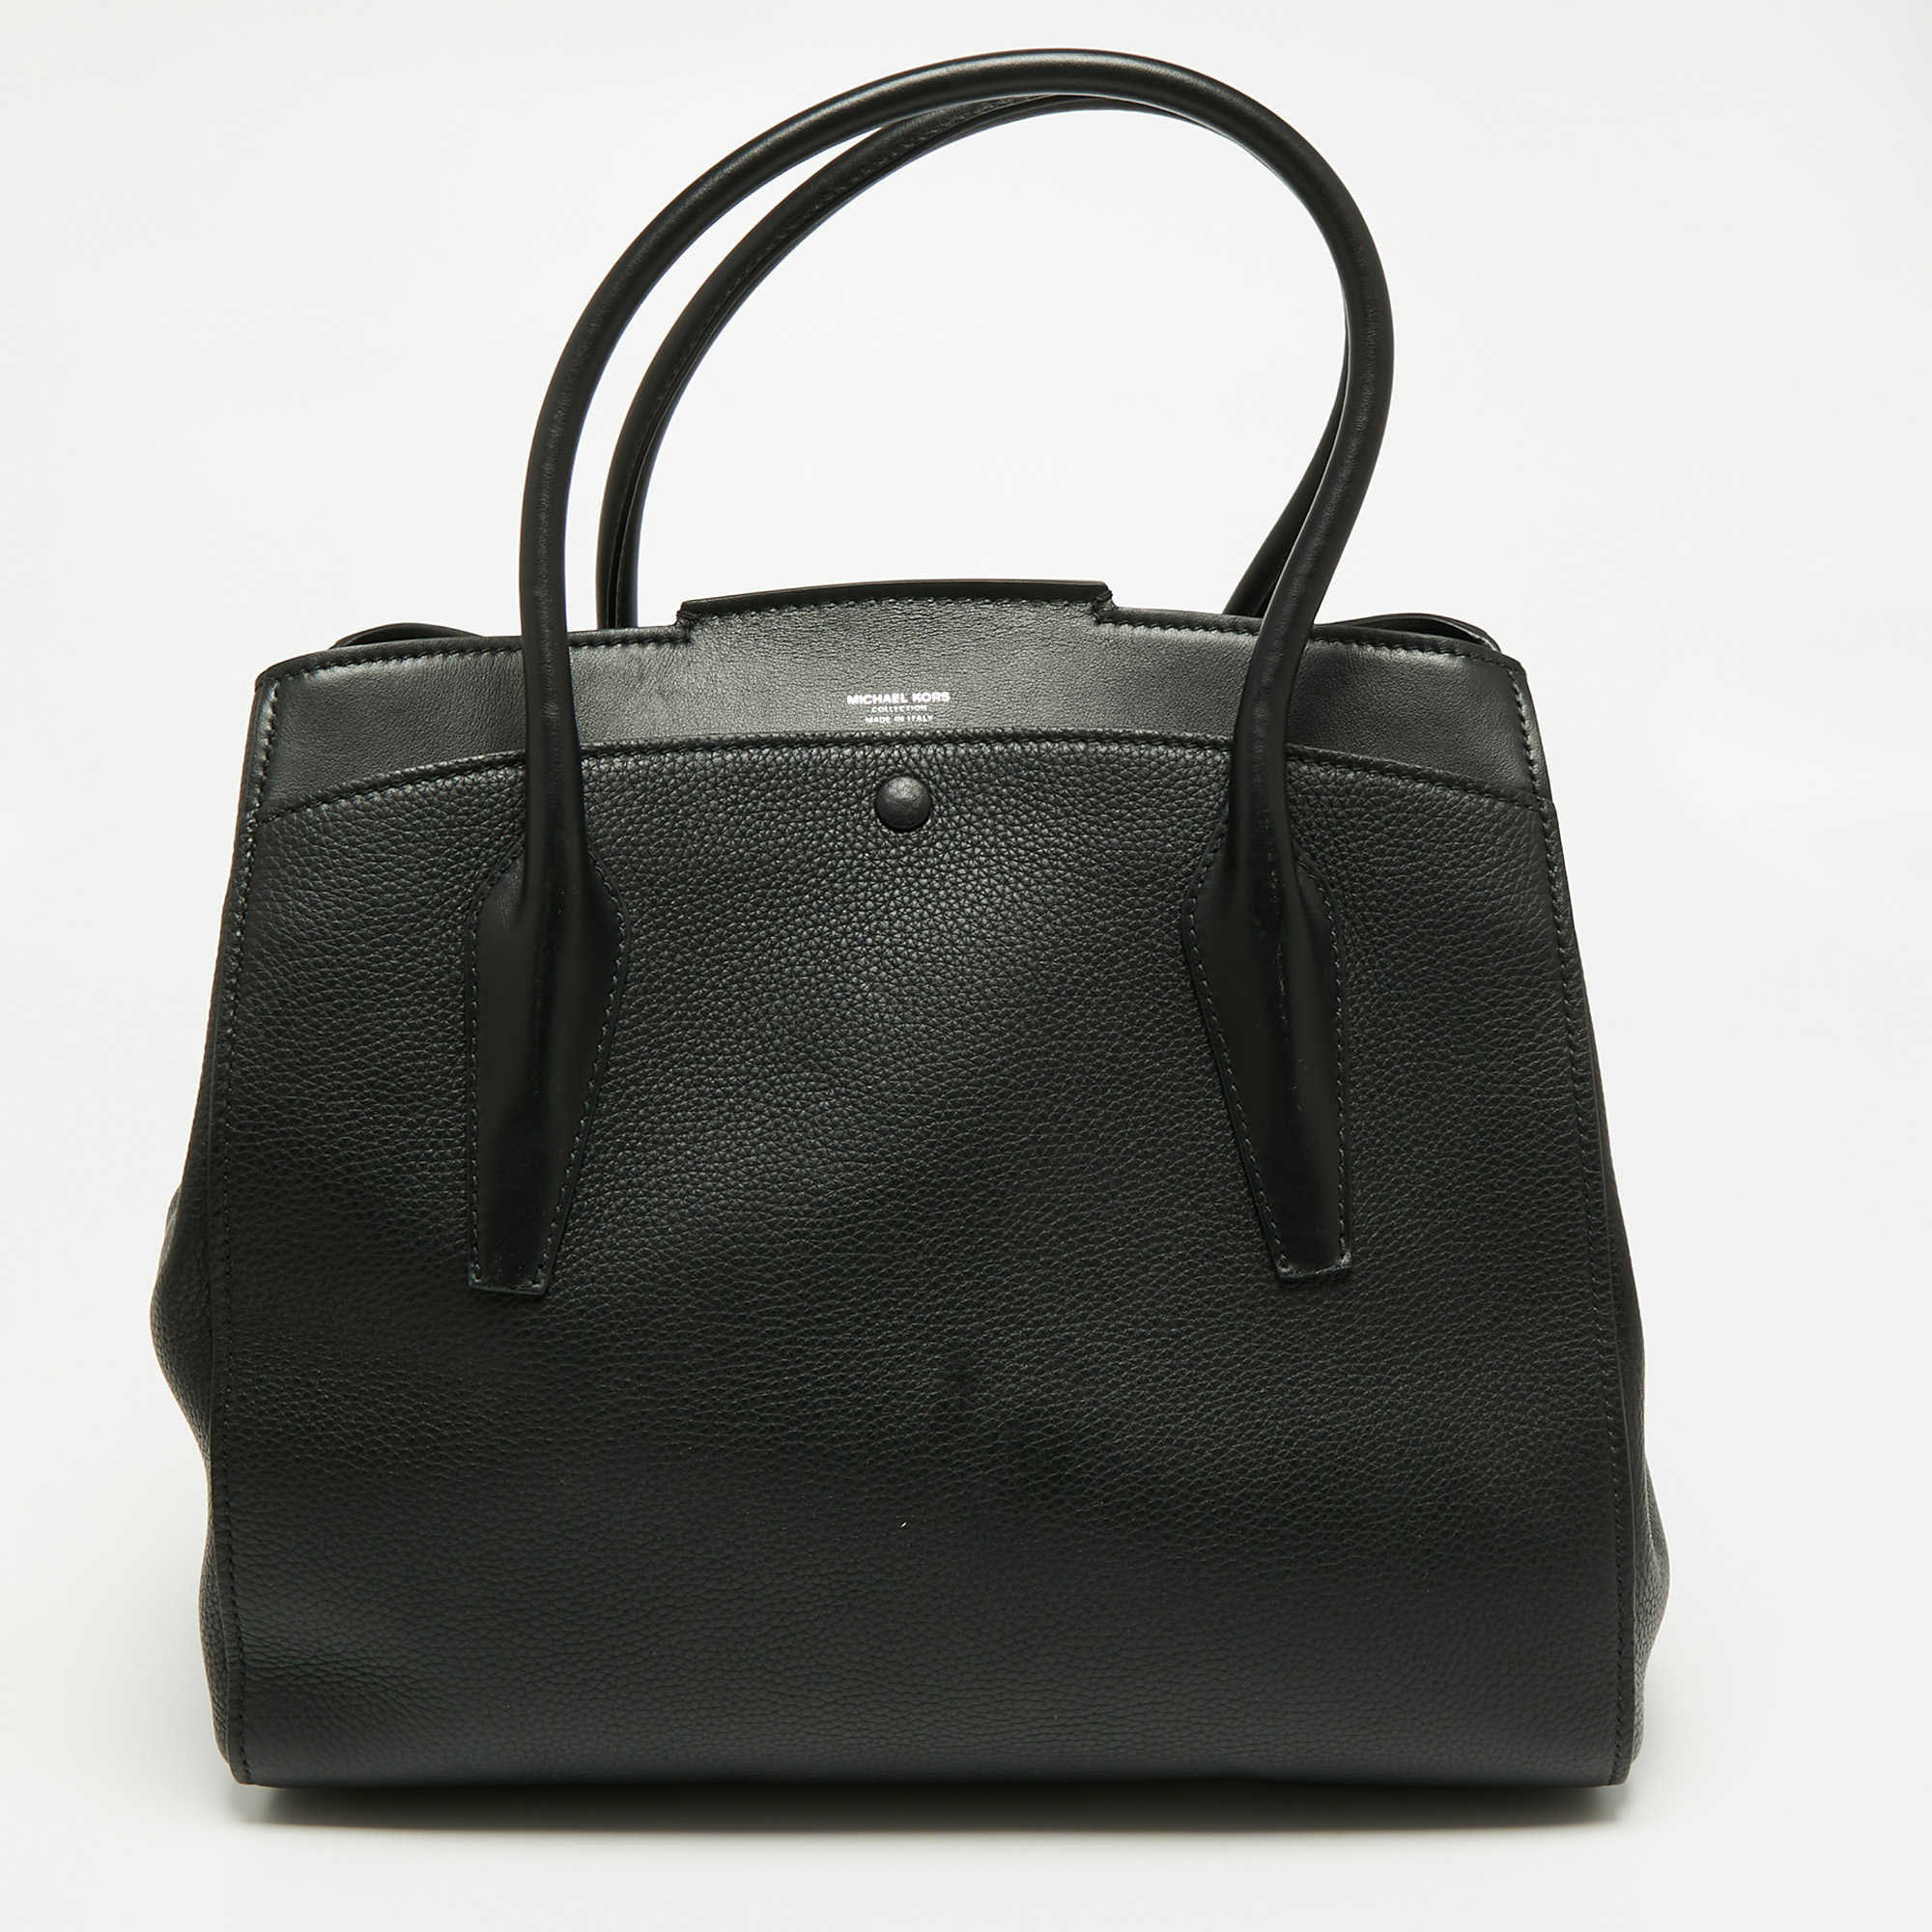 Michael Kors Collection Black Leather Blancroft Tote